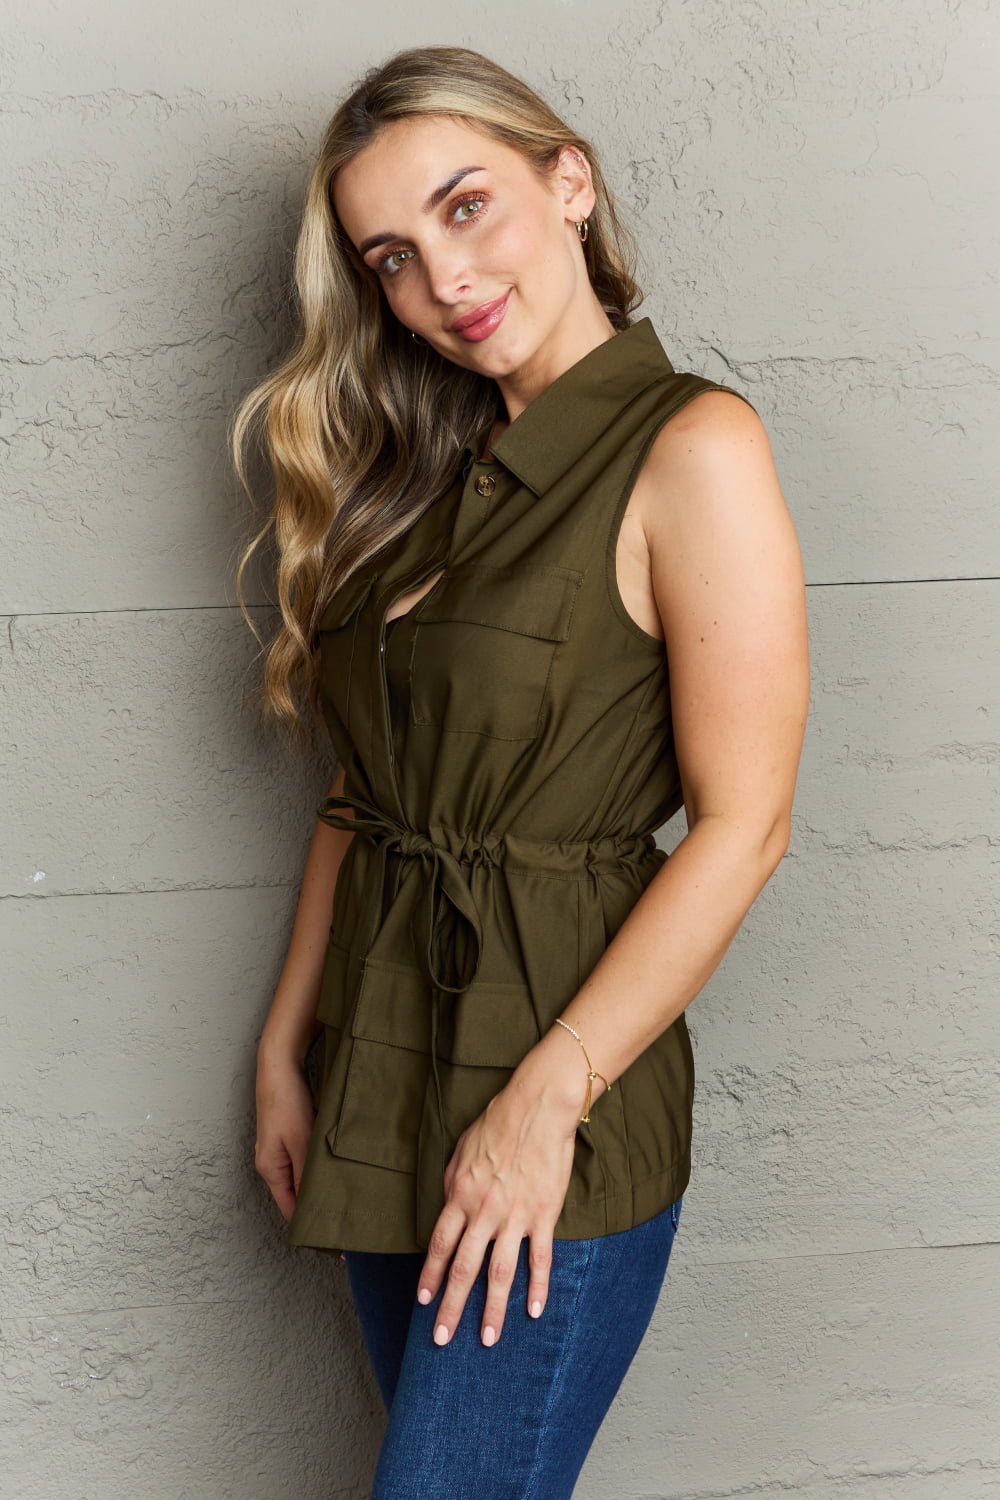 Follow The Light Sleeveless Collared Button Down Top - Camis & Tops - Shirts & Tops - 4 - 2024